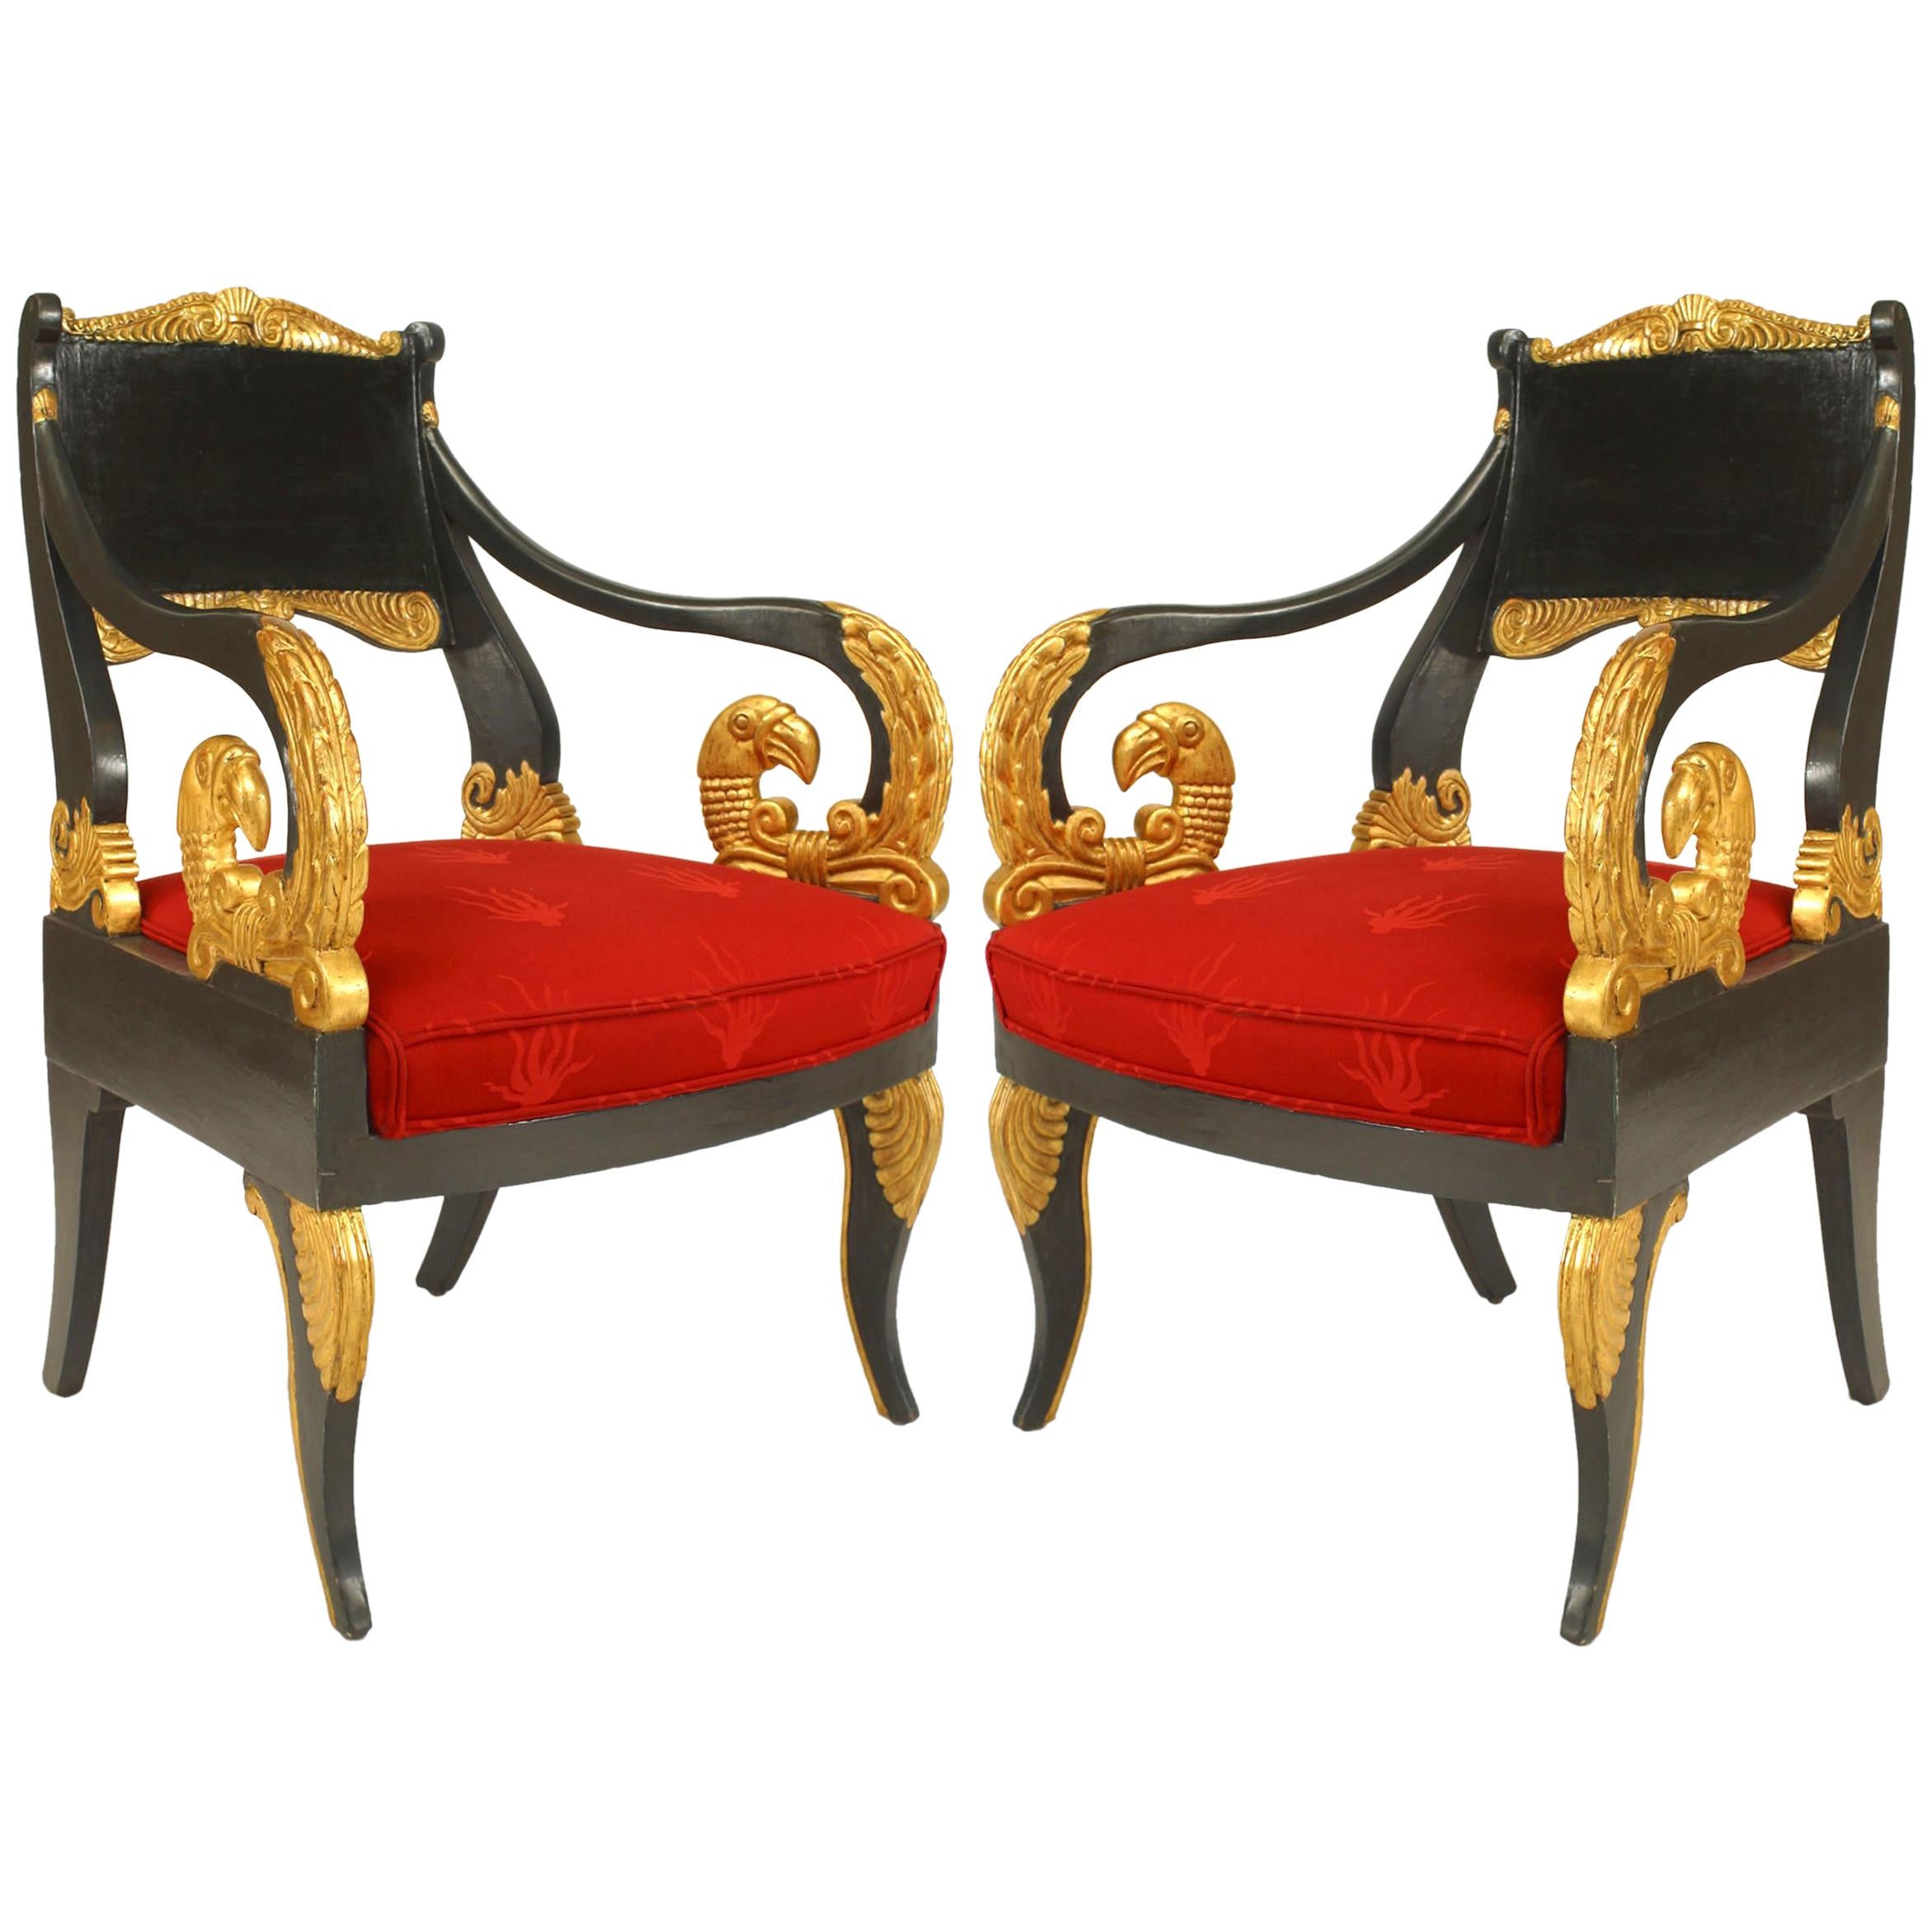 Pair of Russian Neoclassic Painted and Parcel Gilt Armchairs